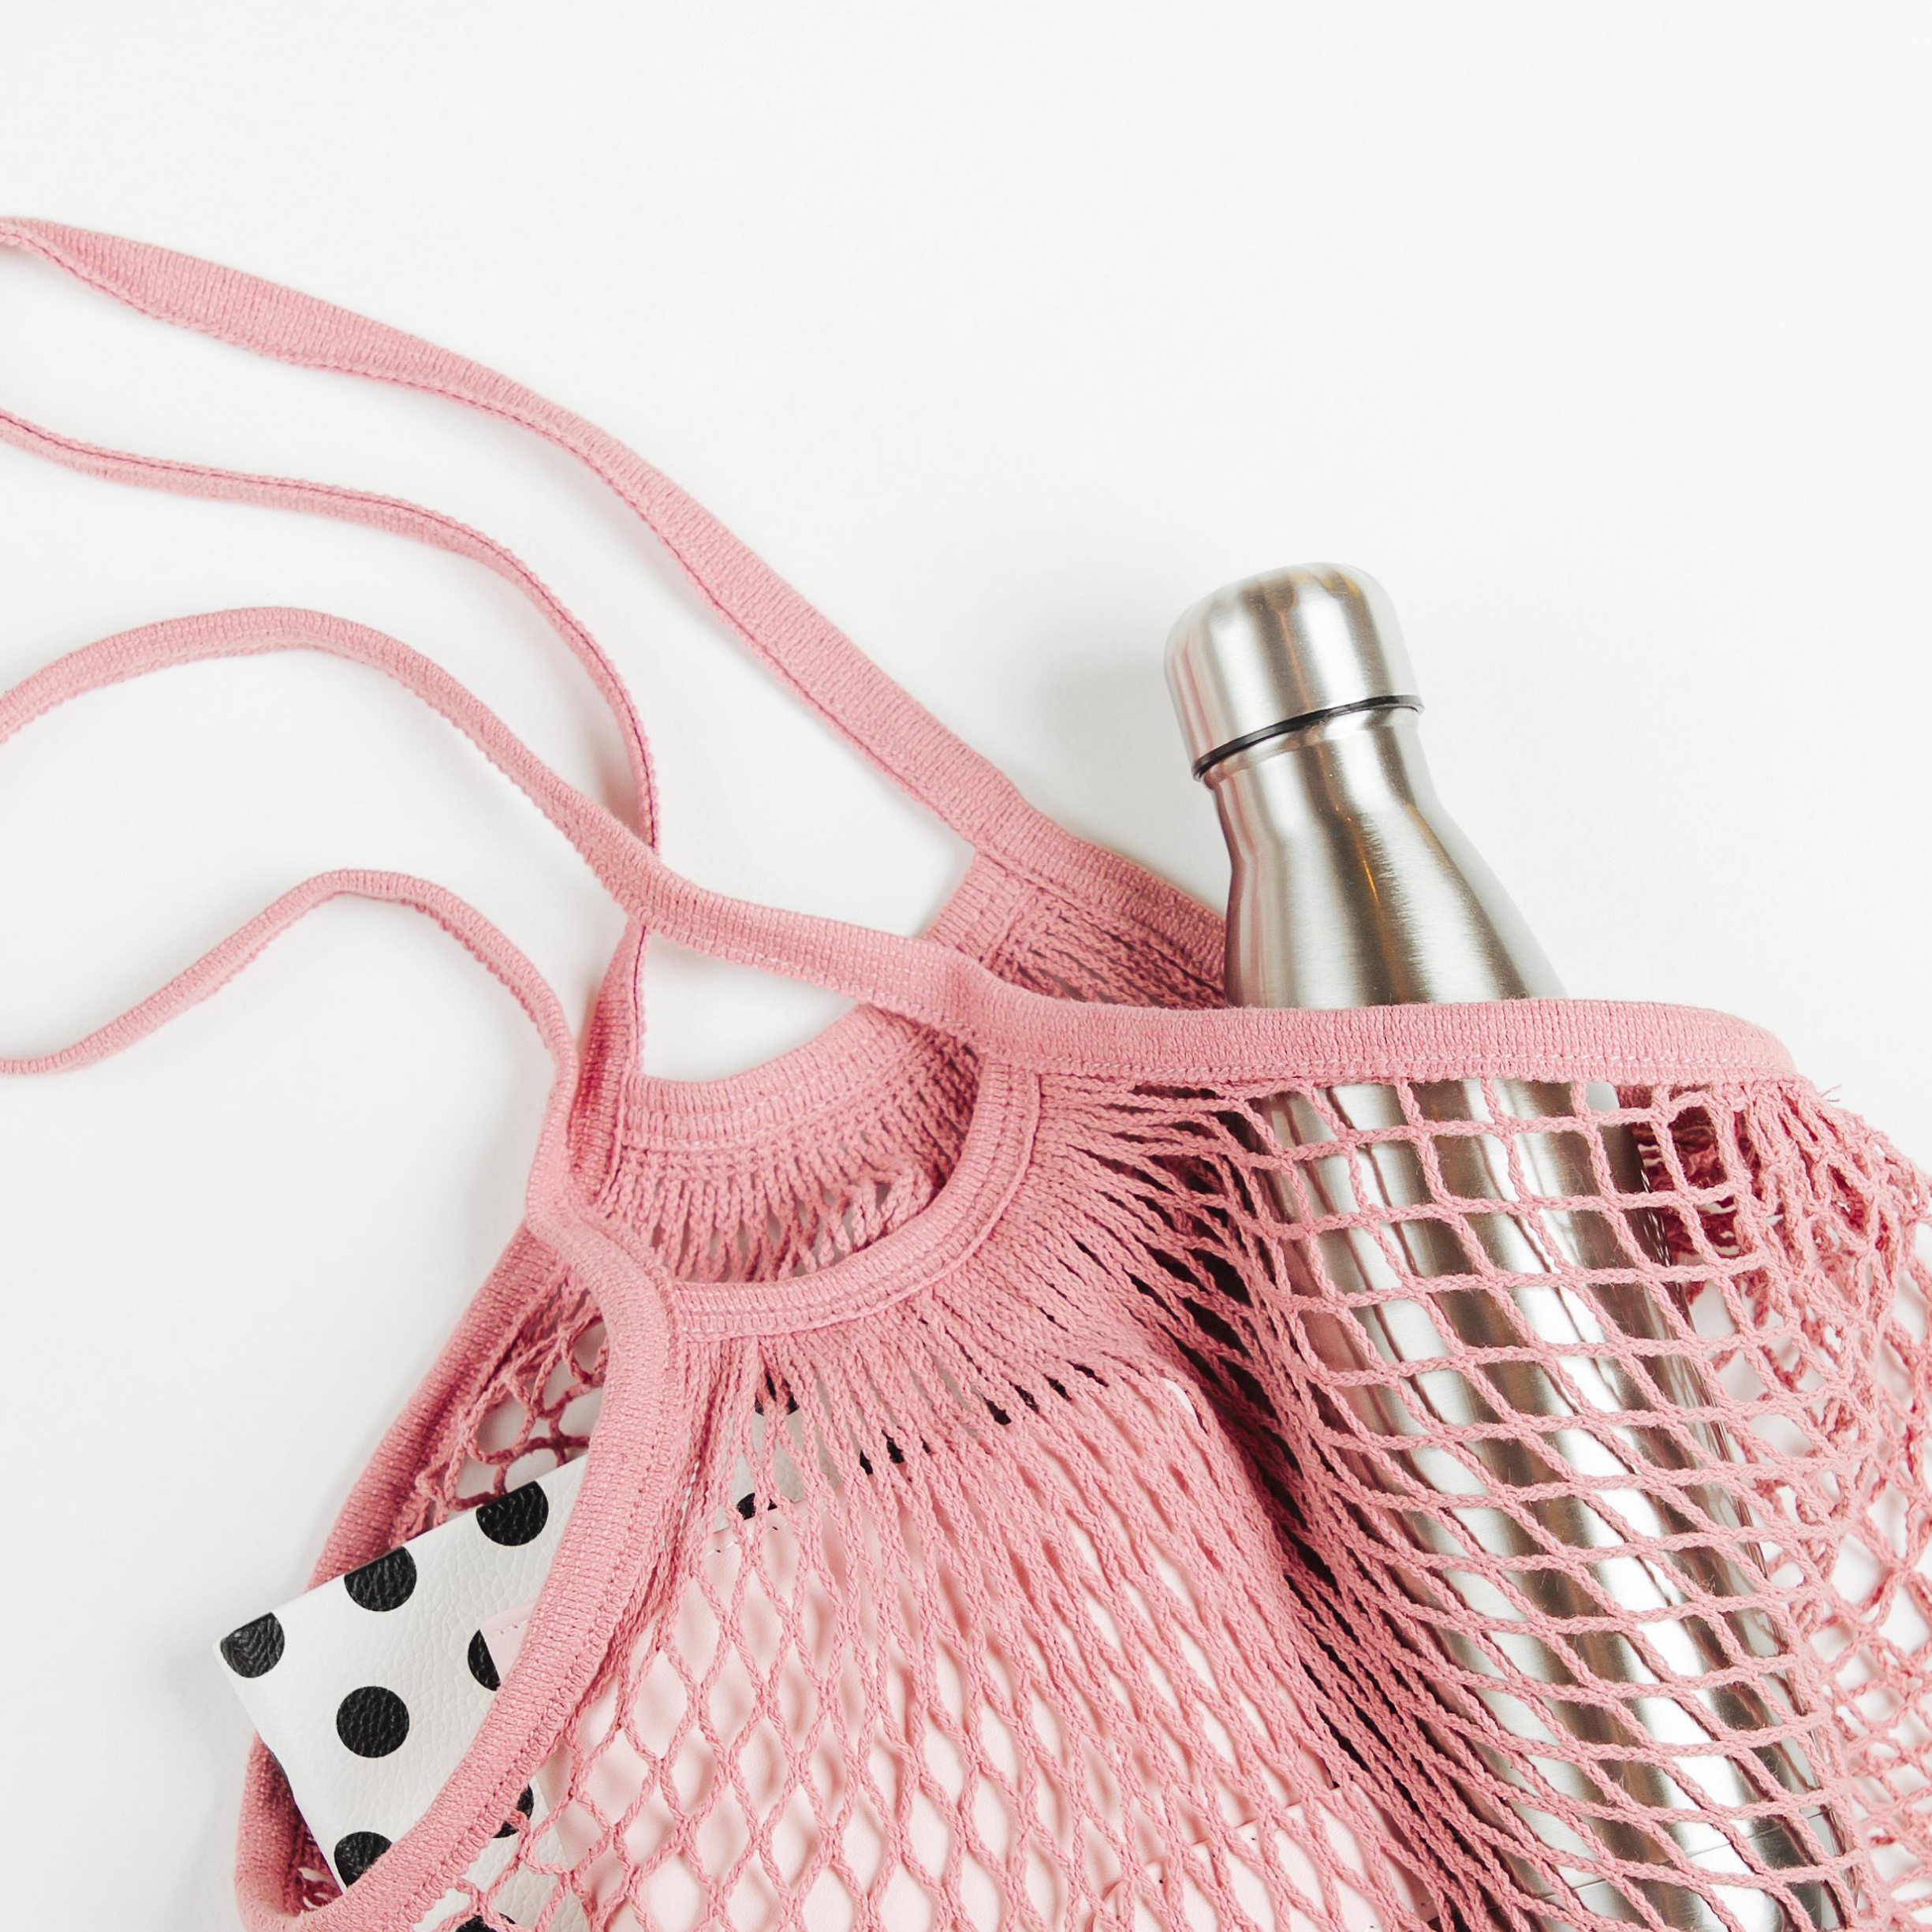 Stainless steel water bottle in pink mesh tote bag on white background, represents “Log Your Water Intake” program